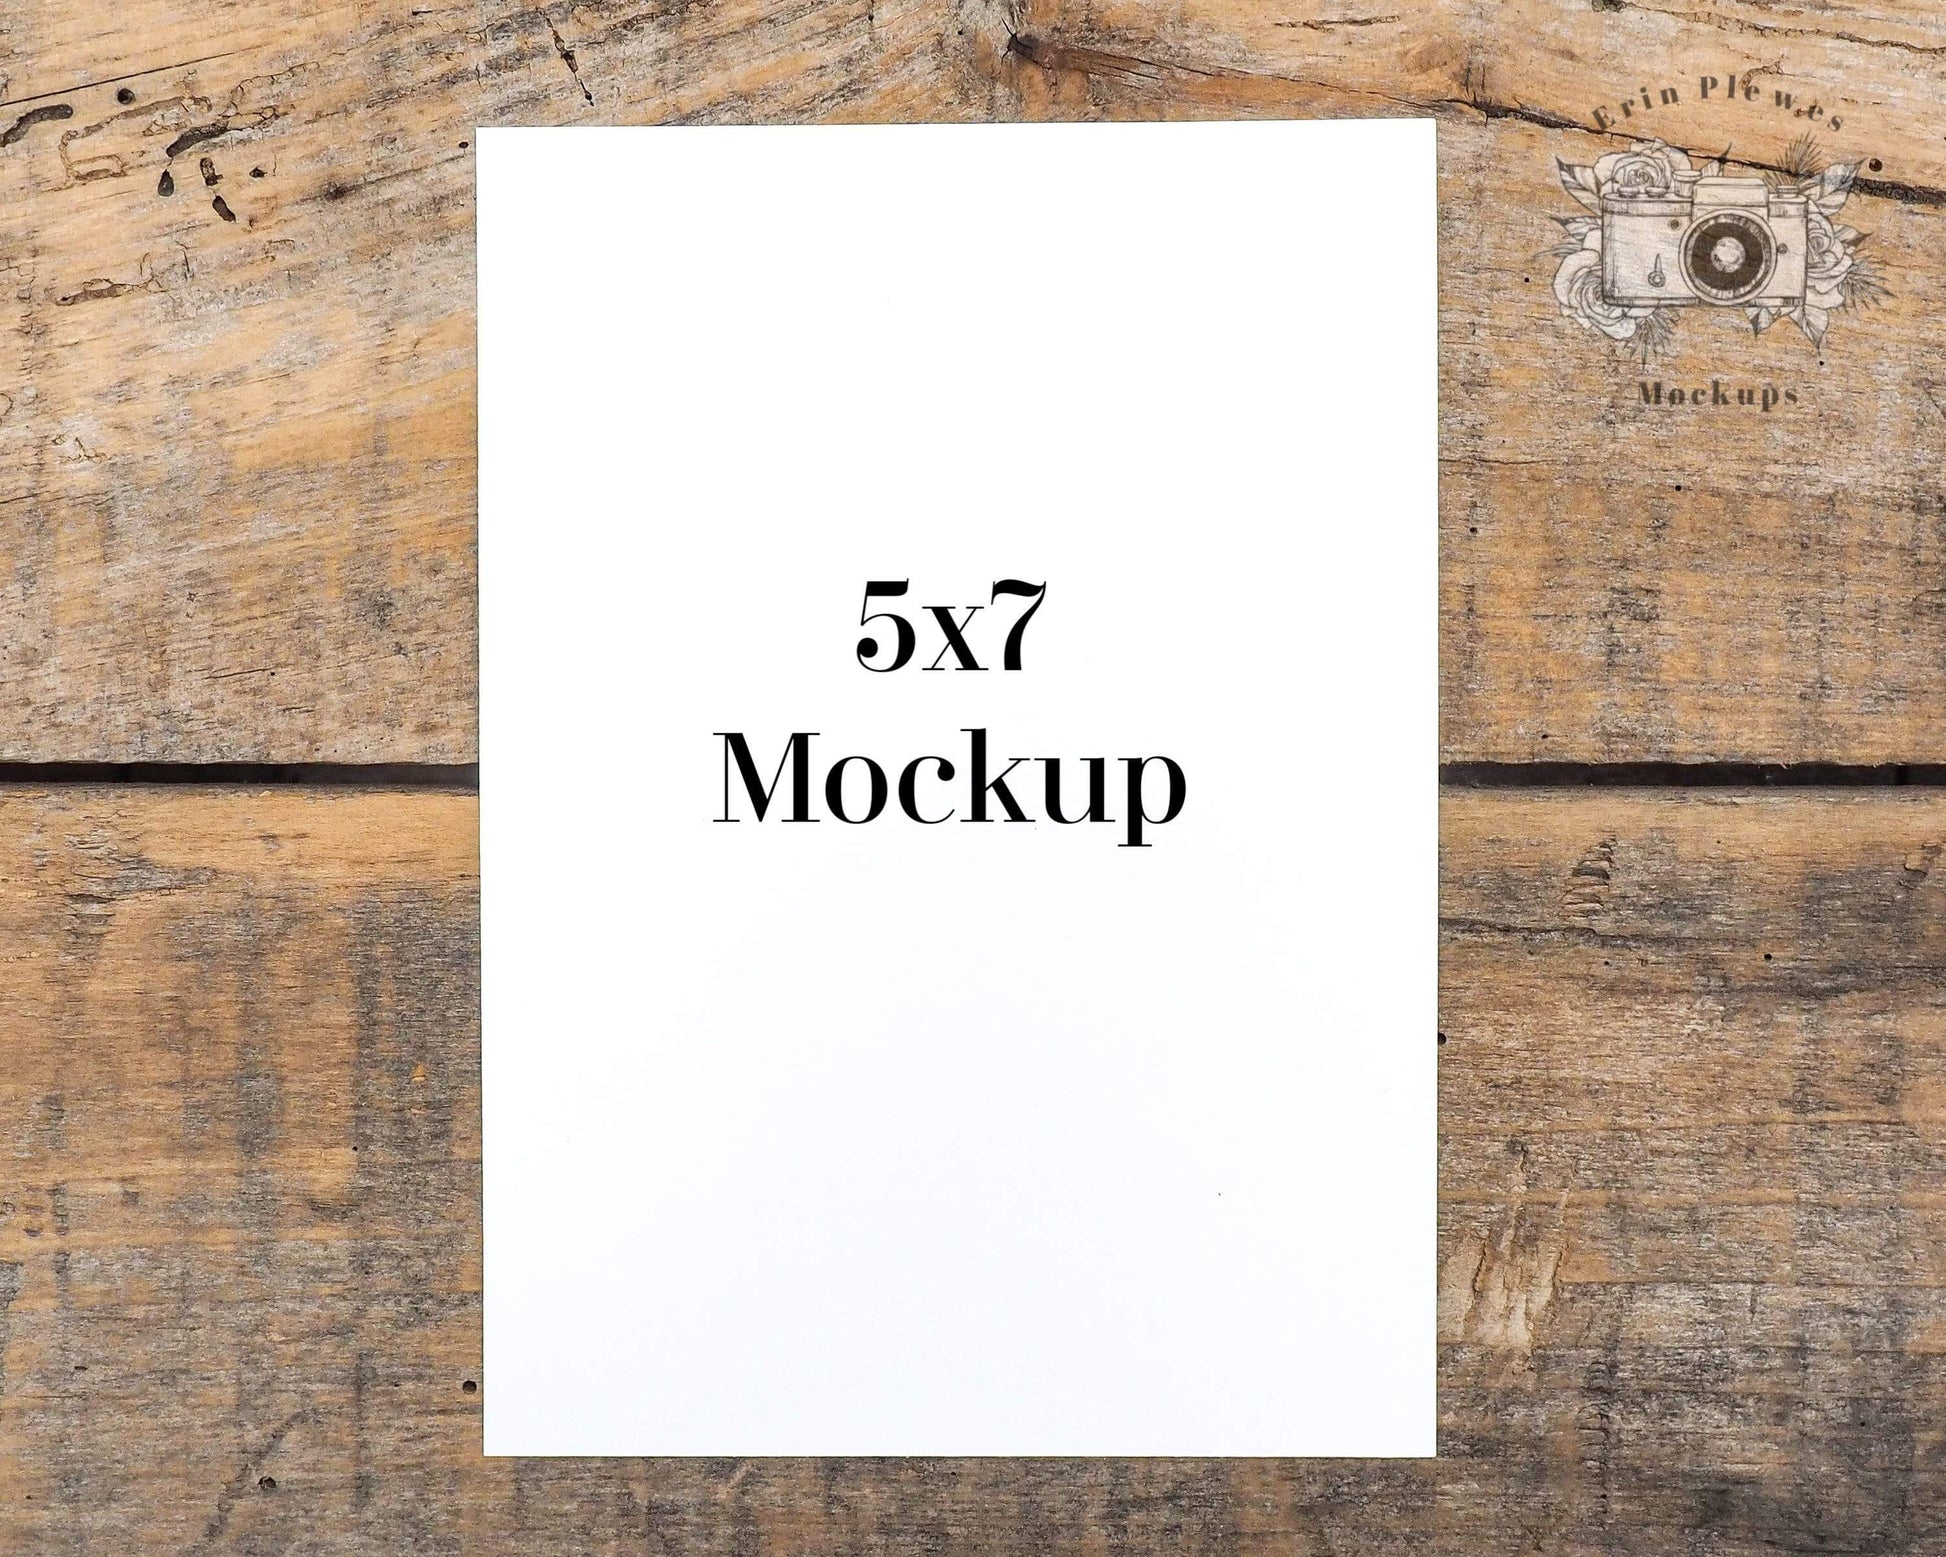 Erin Plewes Mockups Print mockup 5x7, Greeting card mockup, Rustic thank you note mockup for lifestyle stock photography, Jpeg instant Digital Download